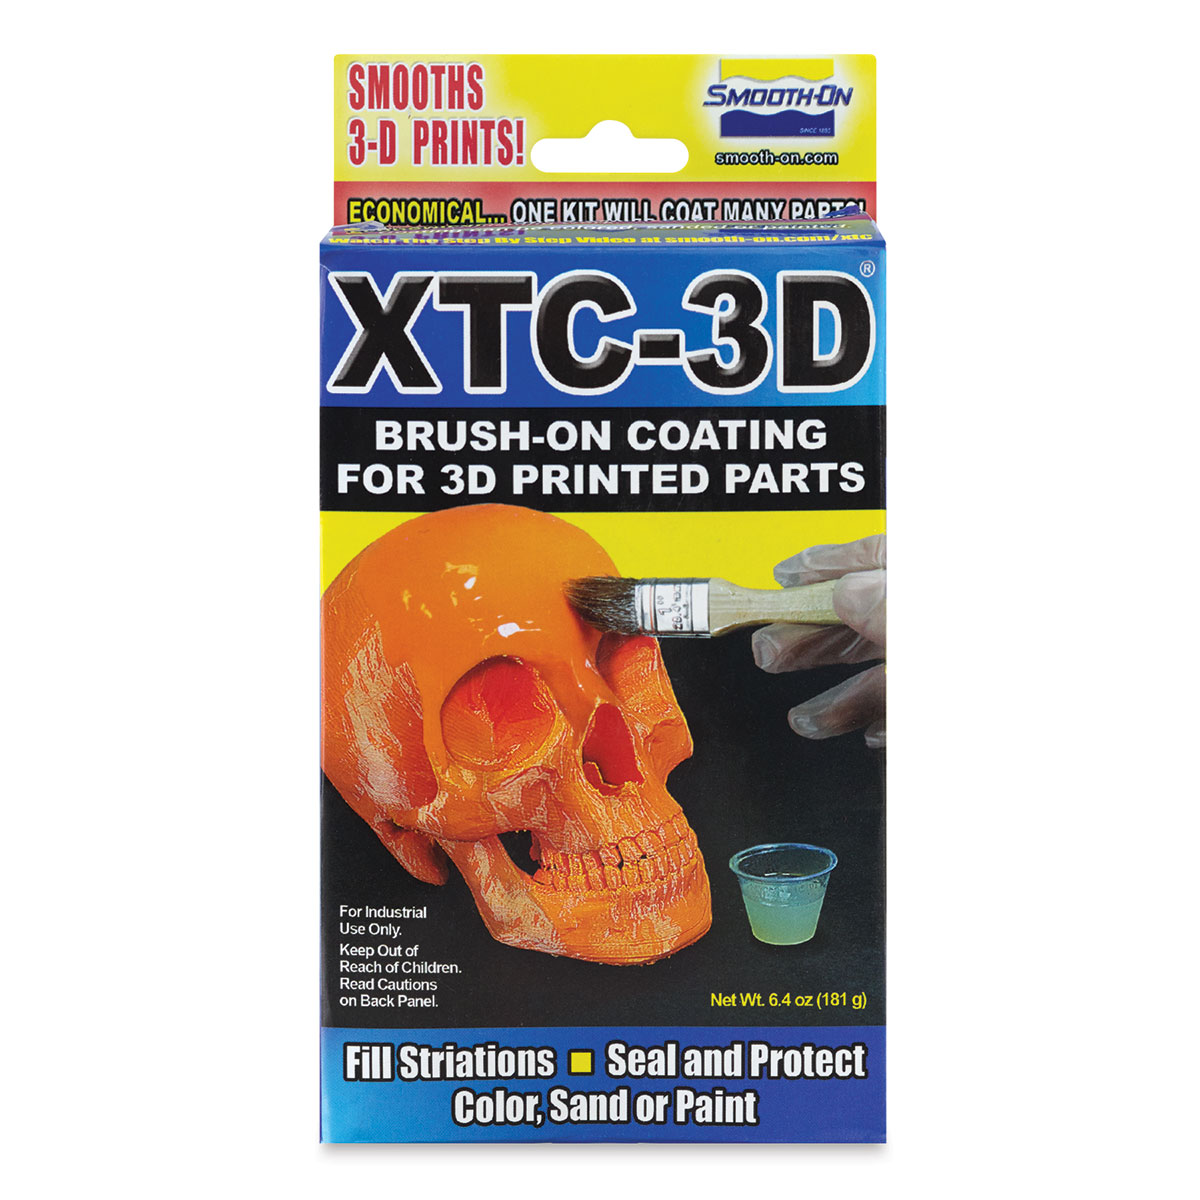 How To Use XTC-3D To Smooth 3D Printed Parts // 3D Printing